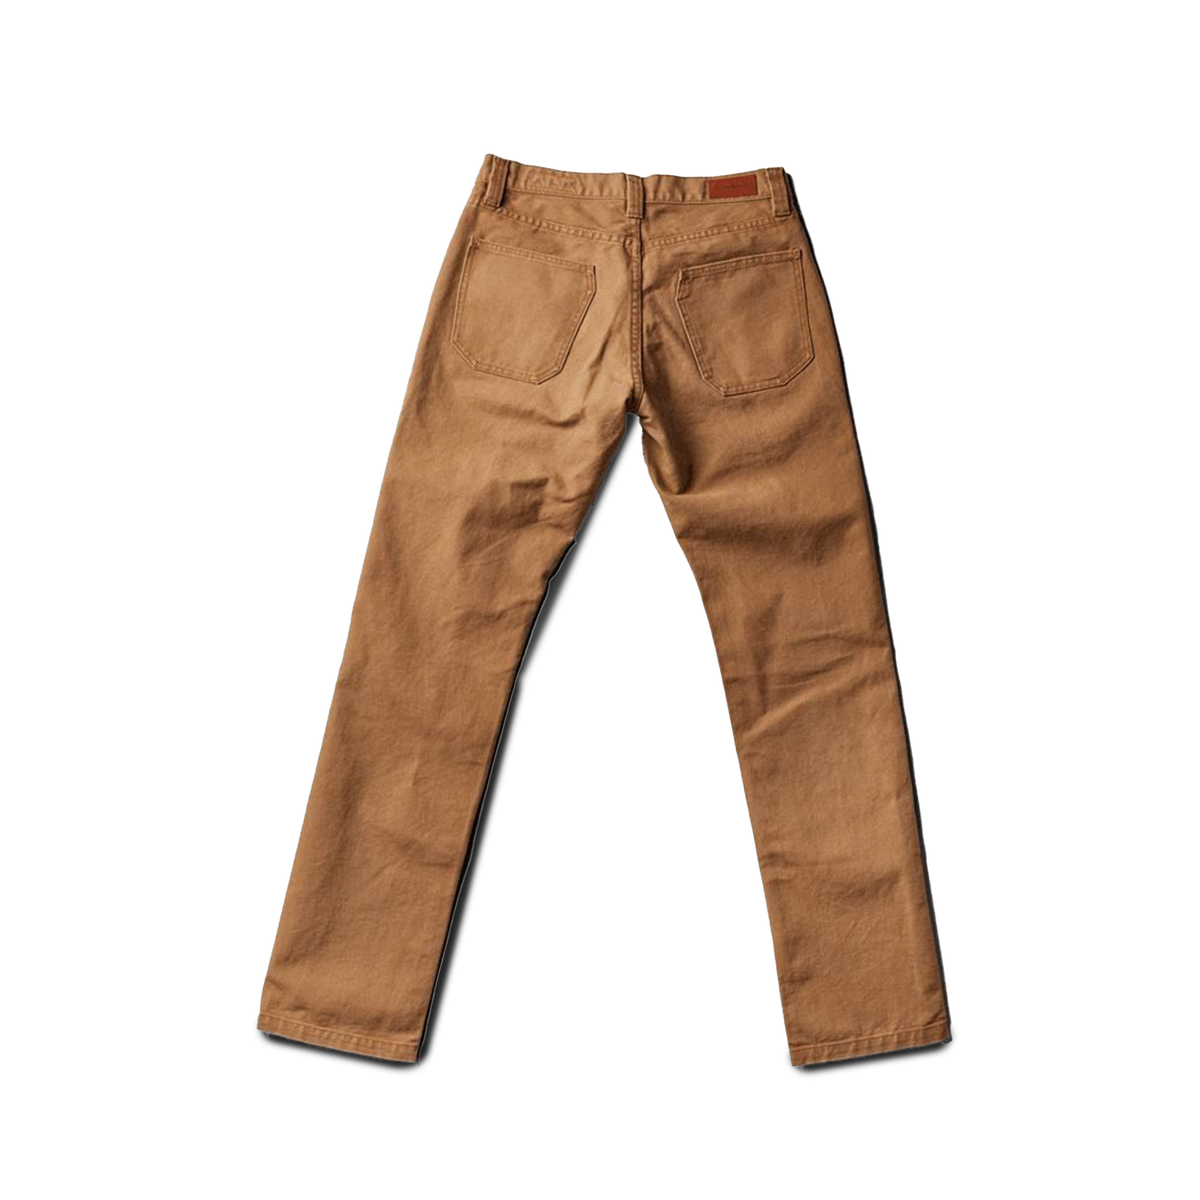 Foundation Canvas Pant - 12 oz. - Camel  ONLY  31